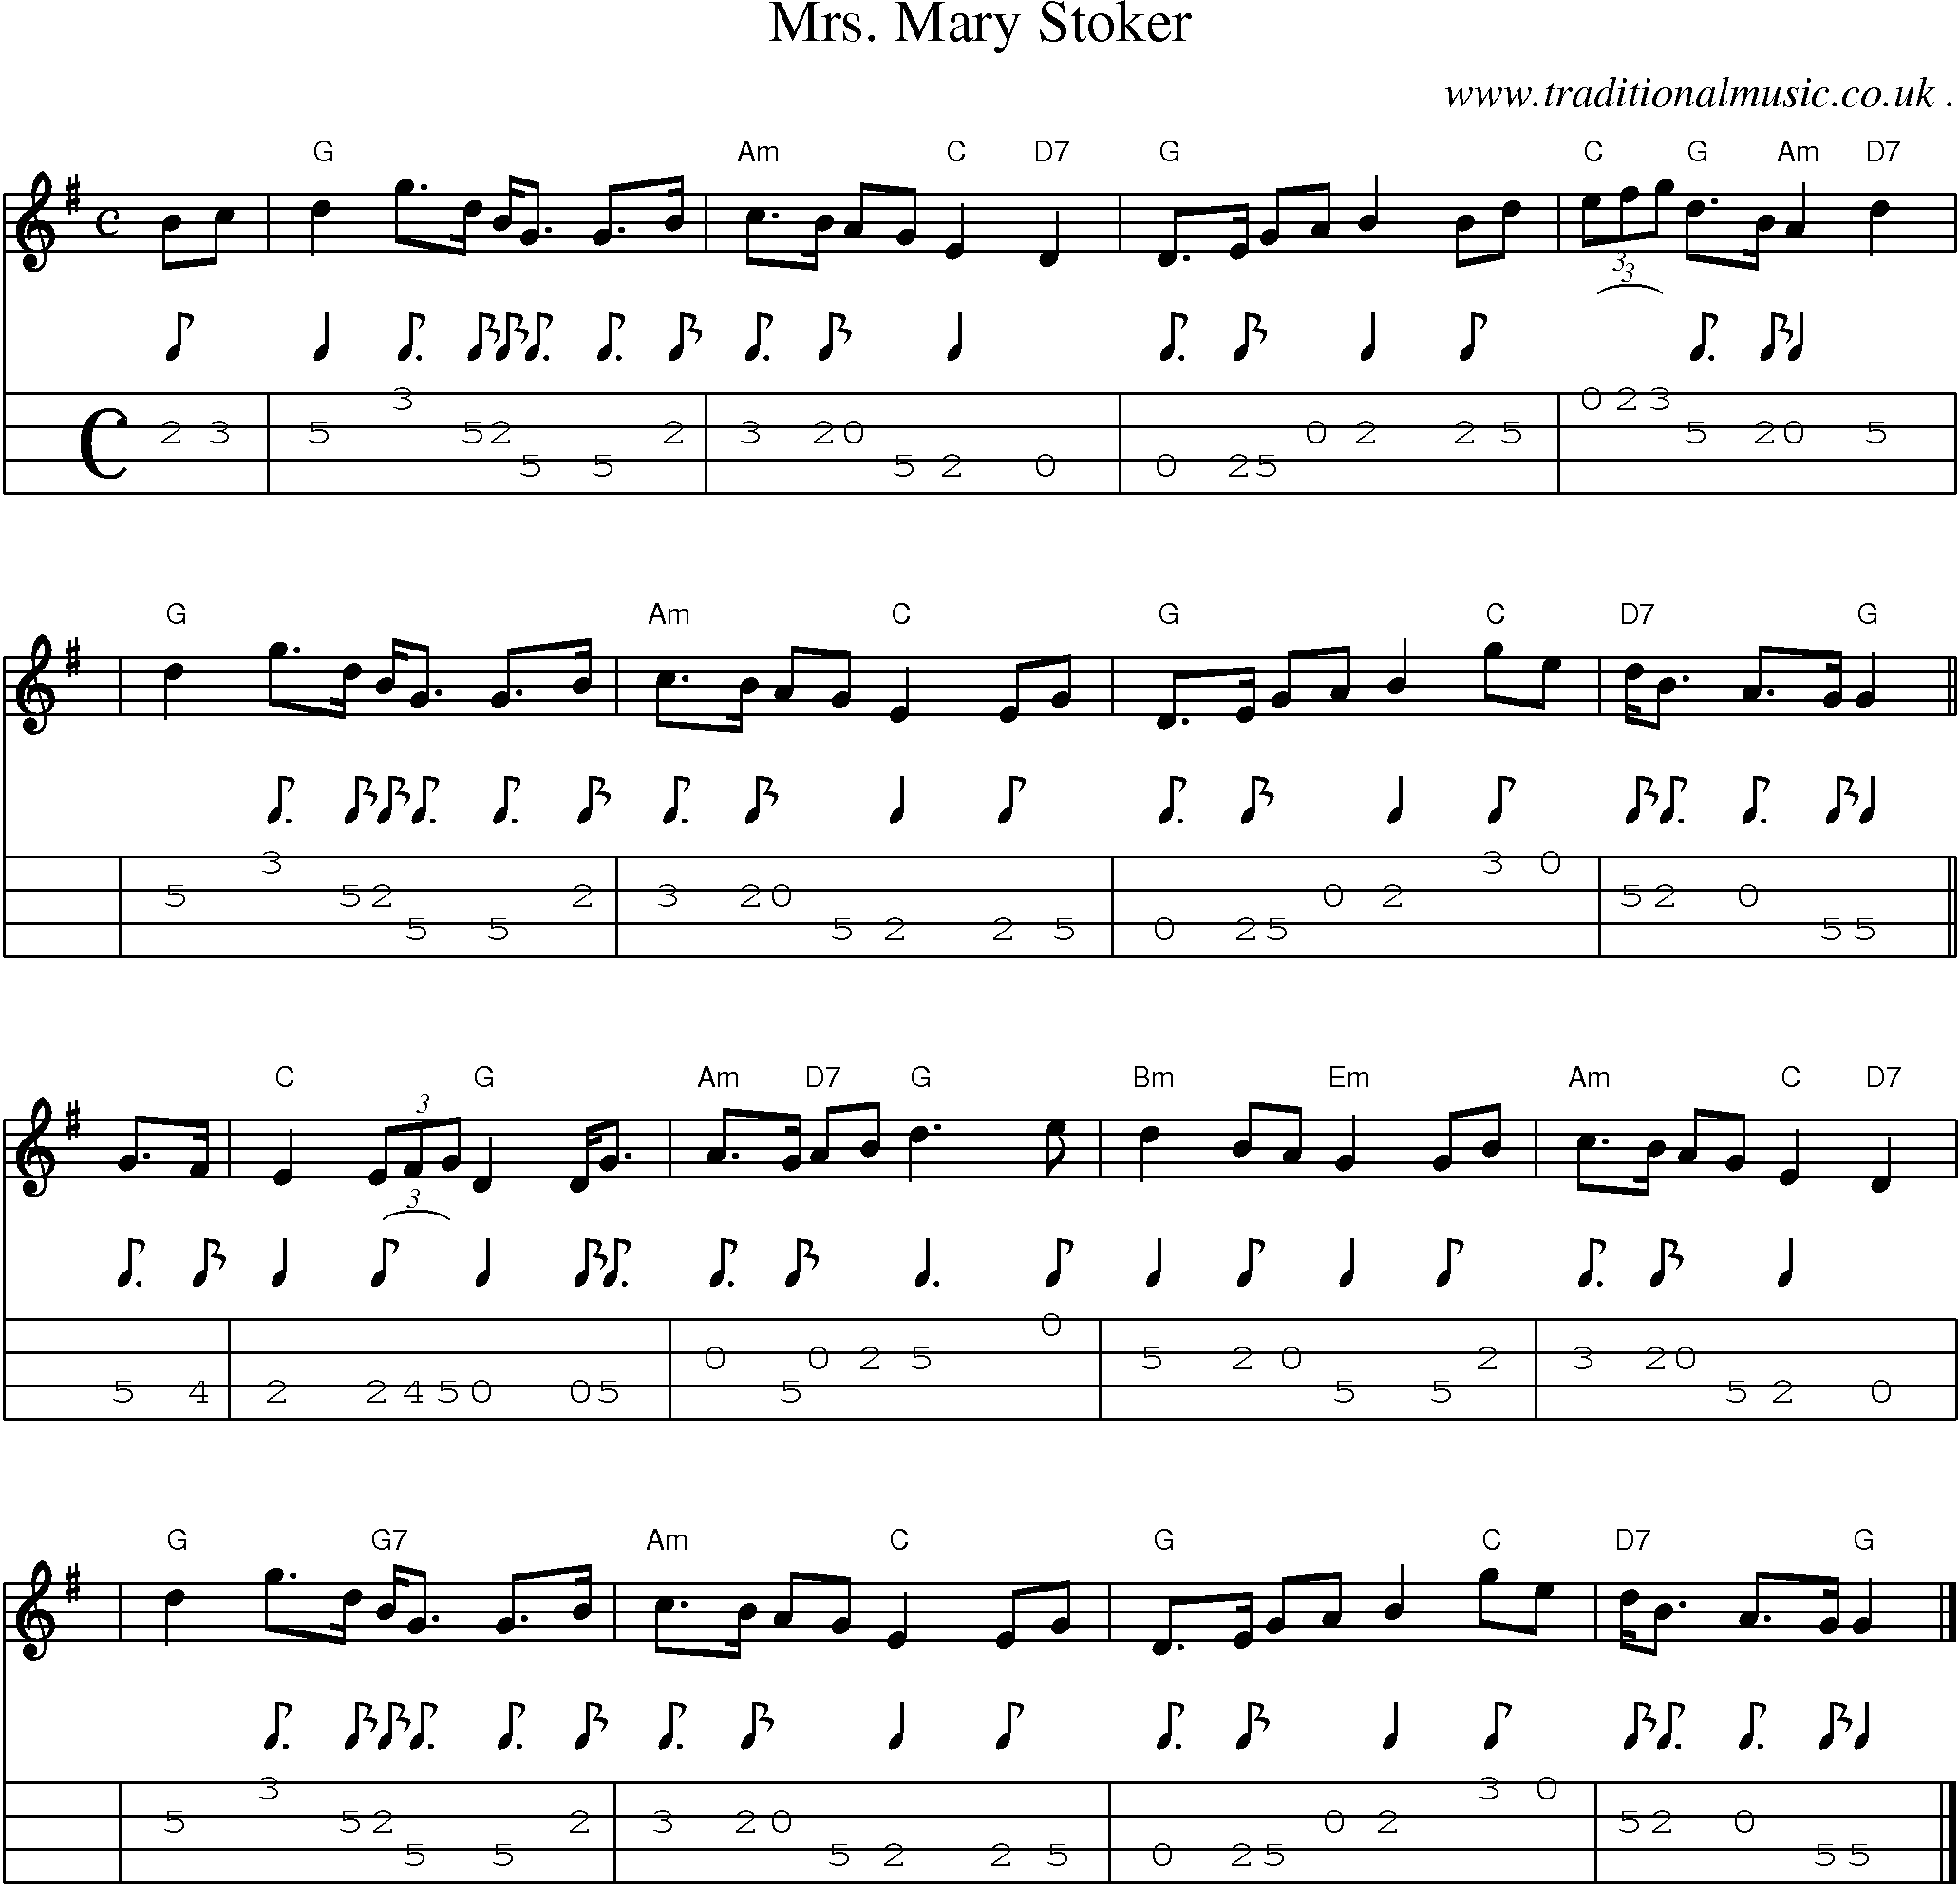 Sheet-music  score, Chords and Mandolin Tabs for Mrs Mary Stoker